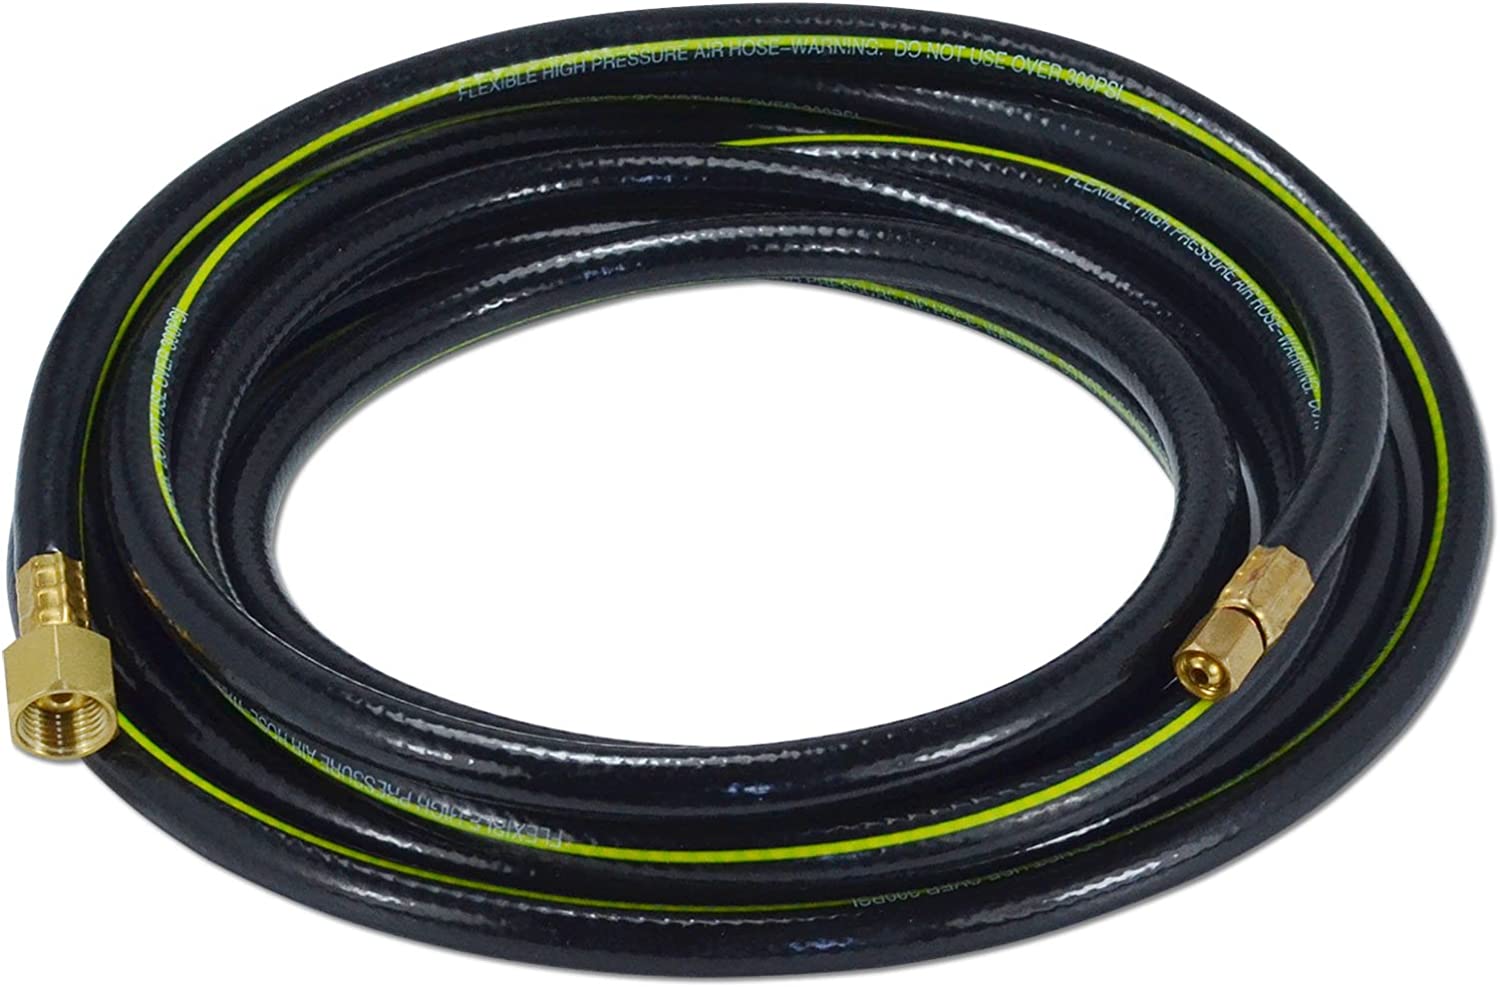 Power Cable Hose for PT-31 Plasma Cutter Torch 25" Feet Wire 4mm2 Connector 3/8-24 Inside M16x1.5 (PT-31 25“) 